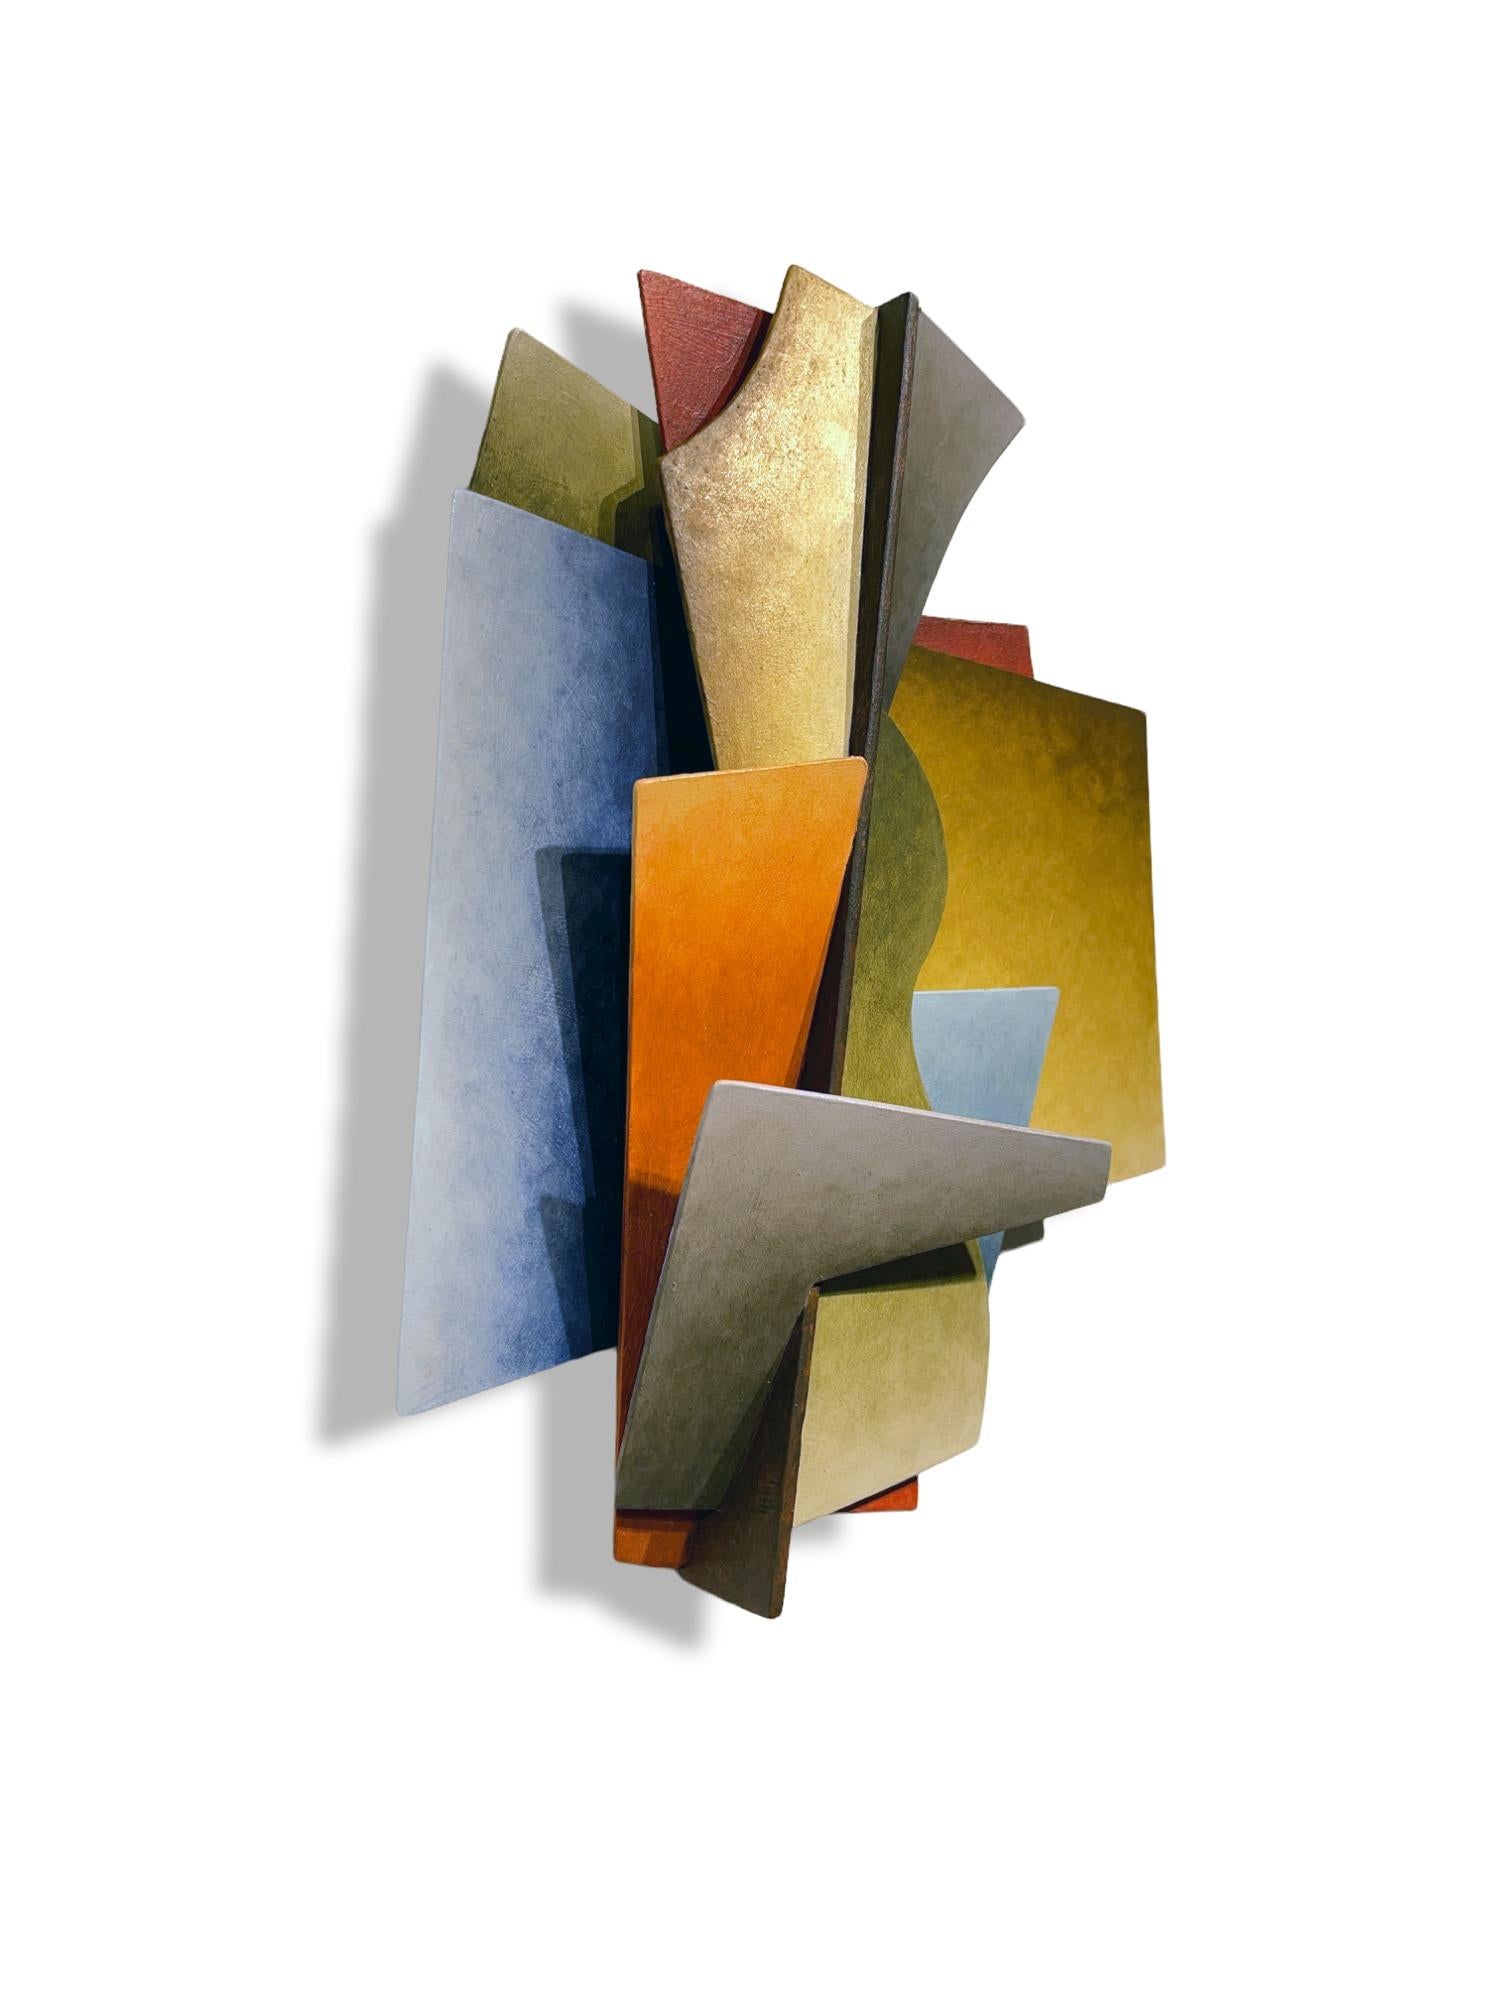 This dynamic wall sculpture is created from sheets of steel, welded together in an abstract geometric pattern.  Muted shades of blue, orange, and yellow dominate and are balanced by softer hues. While the work adheres to a rigid, rational geometry,